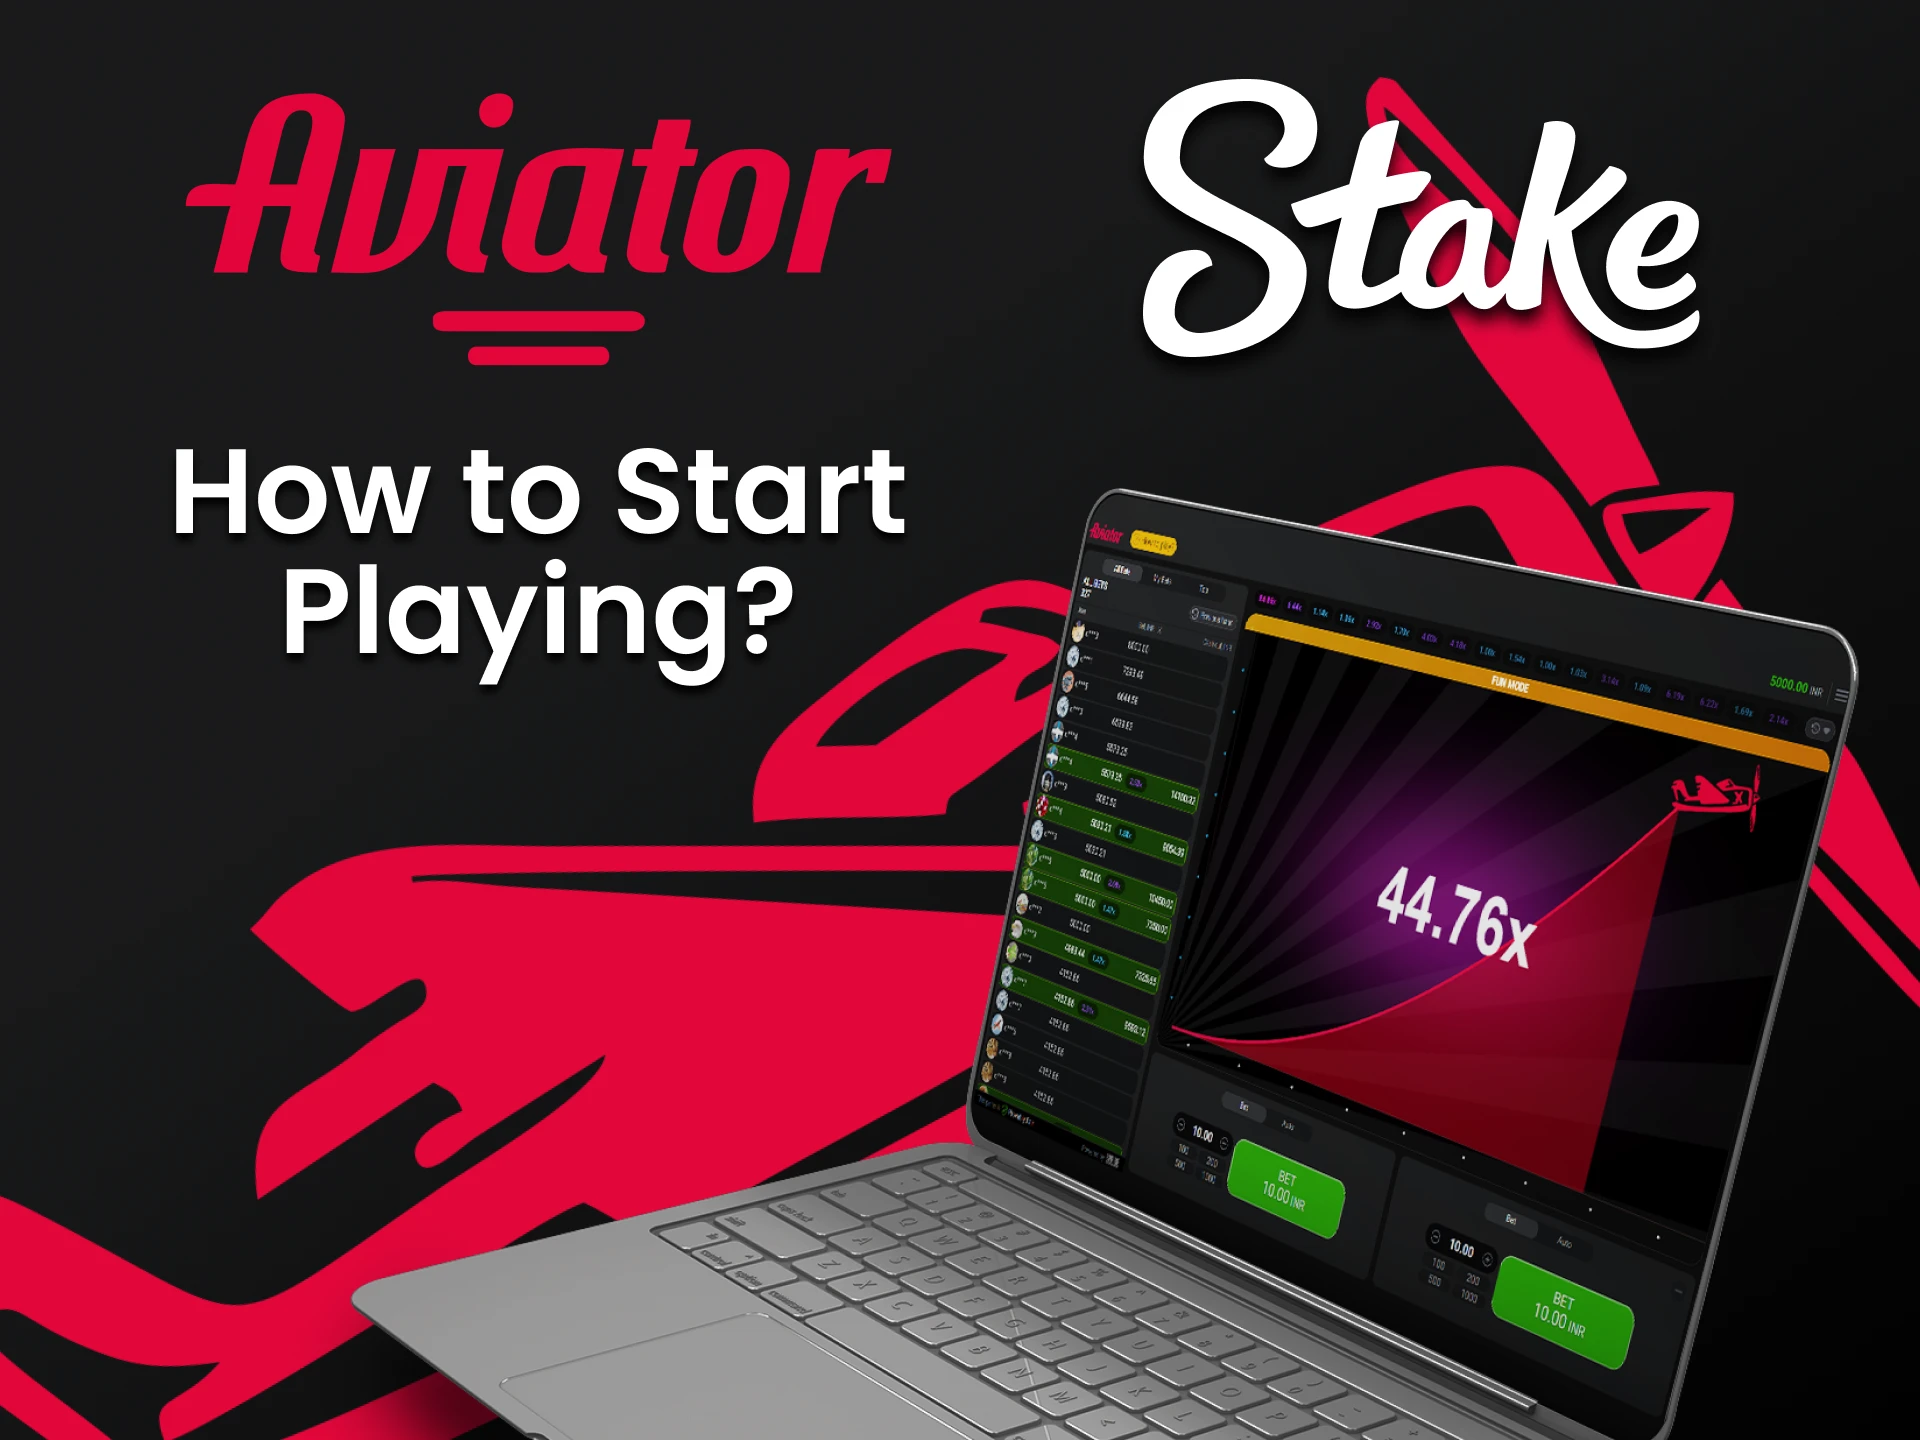 Go to the casino section on Stake to play Aviator.